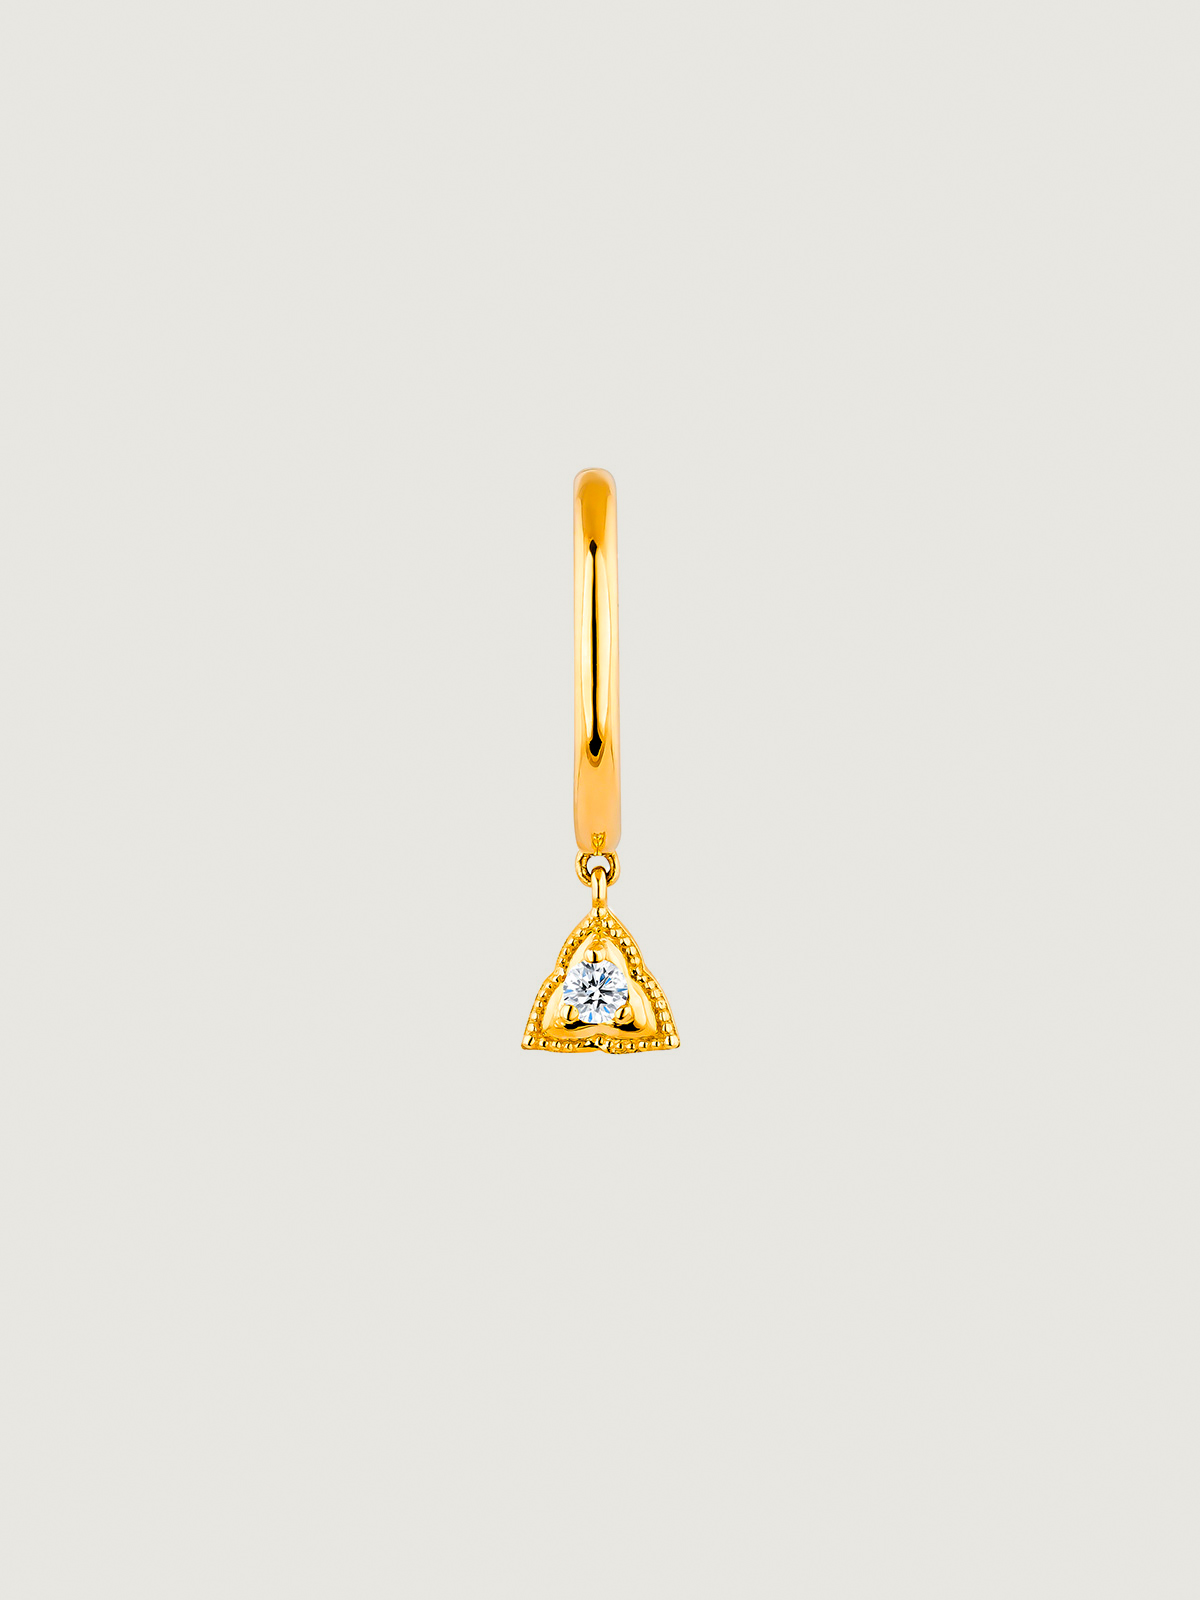 Individual 9K yellow gold hoop earring with triangle and white topaz.